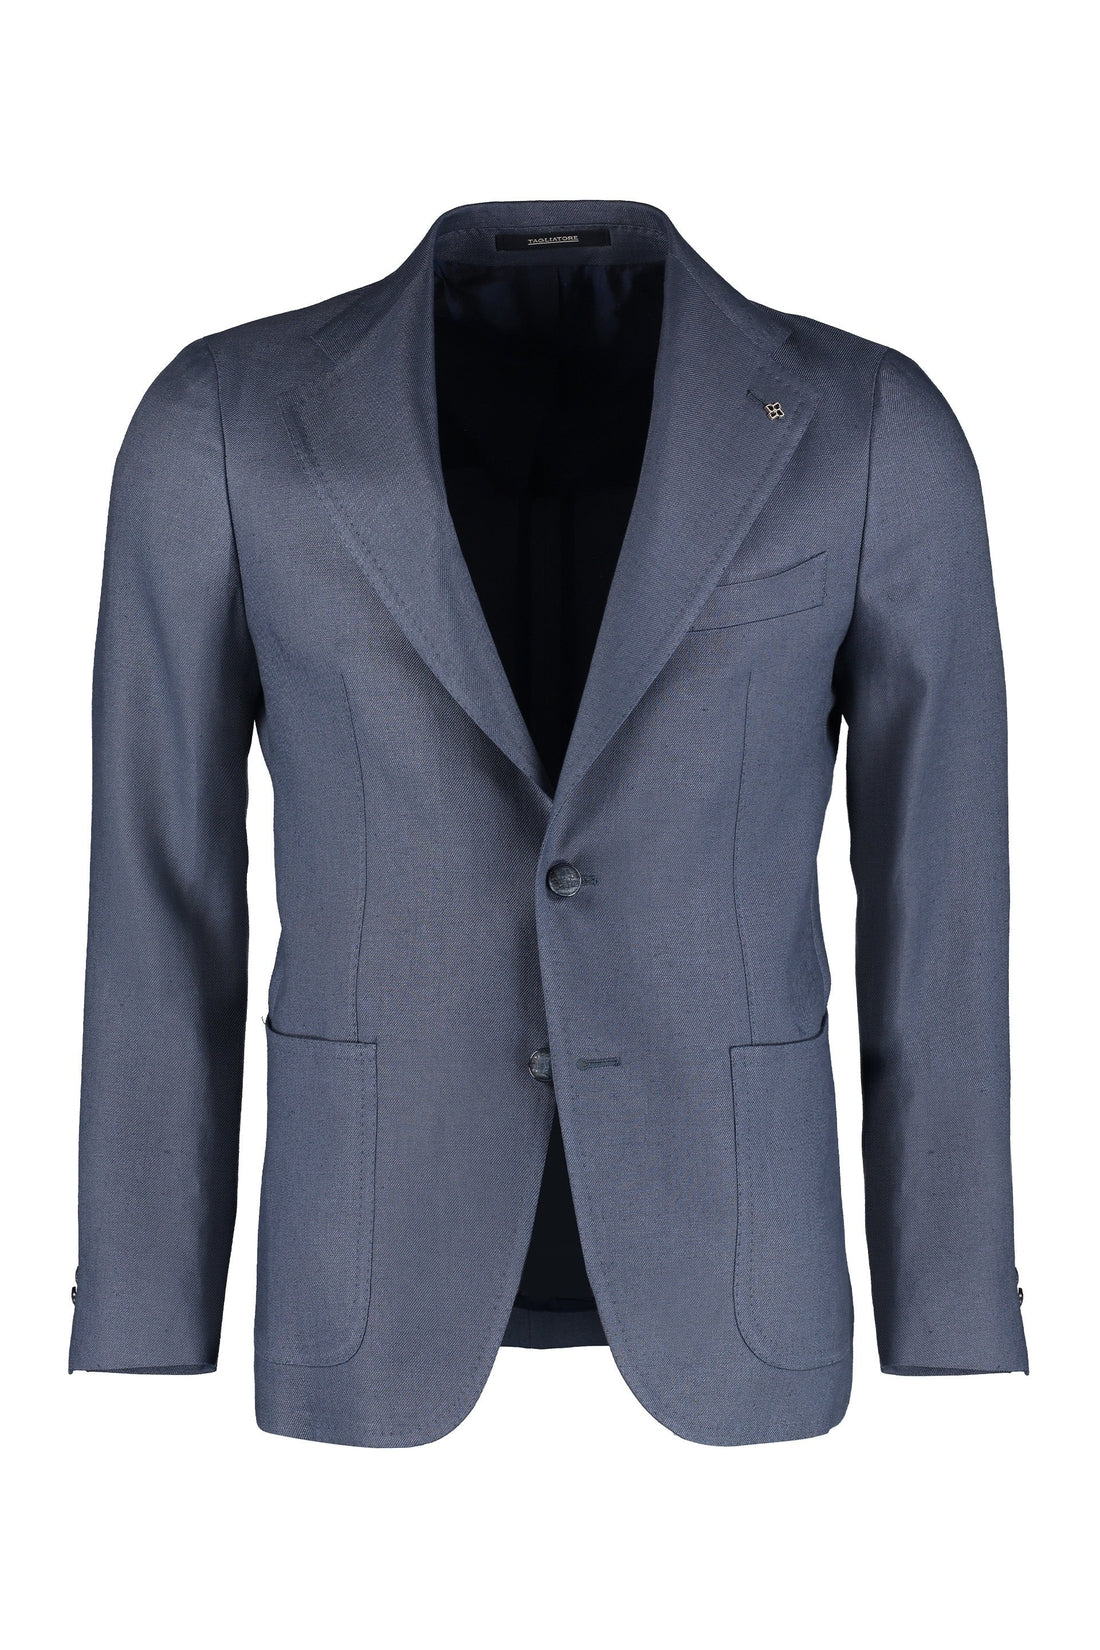 Tagliatore-OUTLET-SALE-Single-breasted two-button jacket-ARCHIVIST